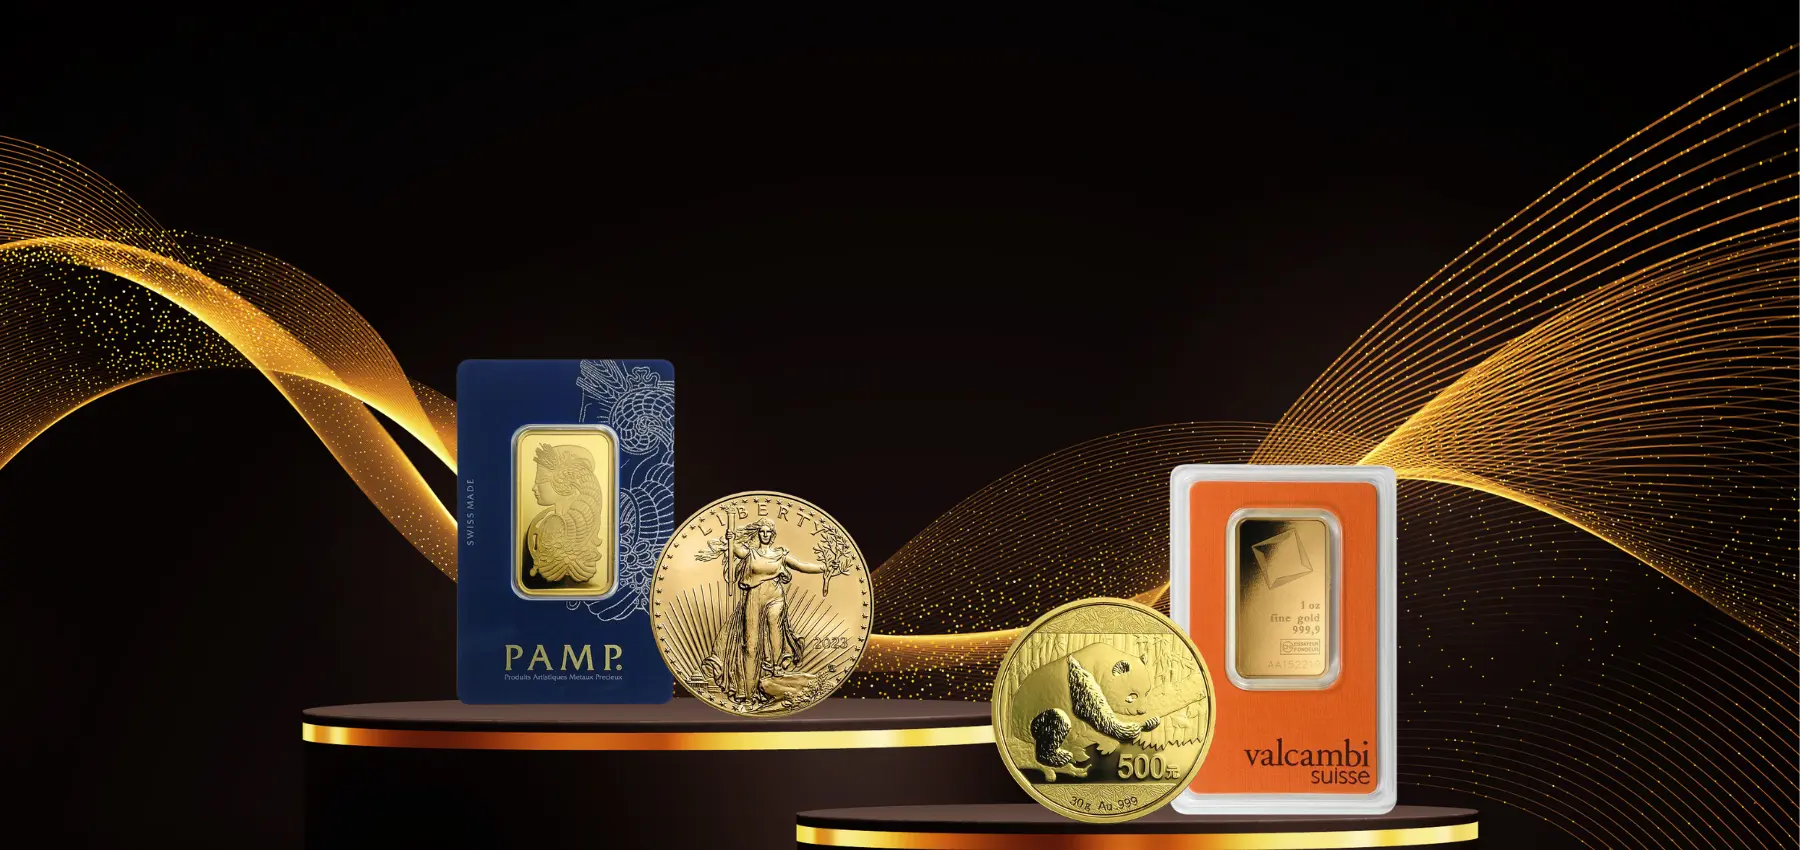 The message 'Extensive Selection of U.S. and World bullion'. Valcambi and PAMP golden bars, a gold U.S. eagle as well as a chinese gold panda coin.